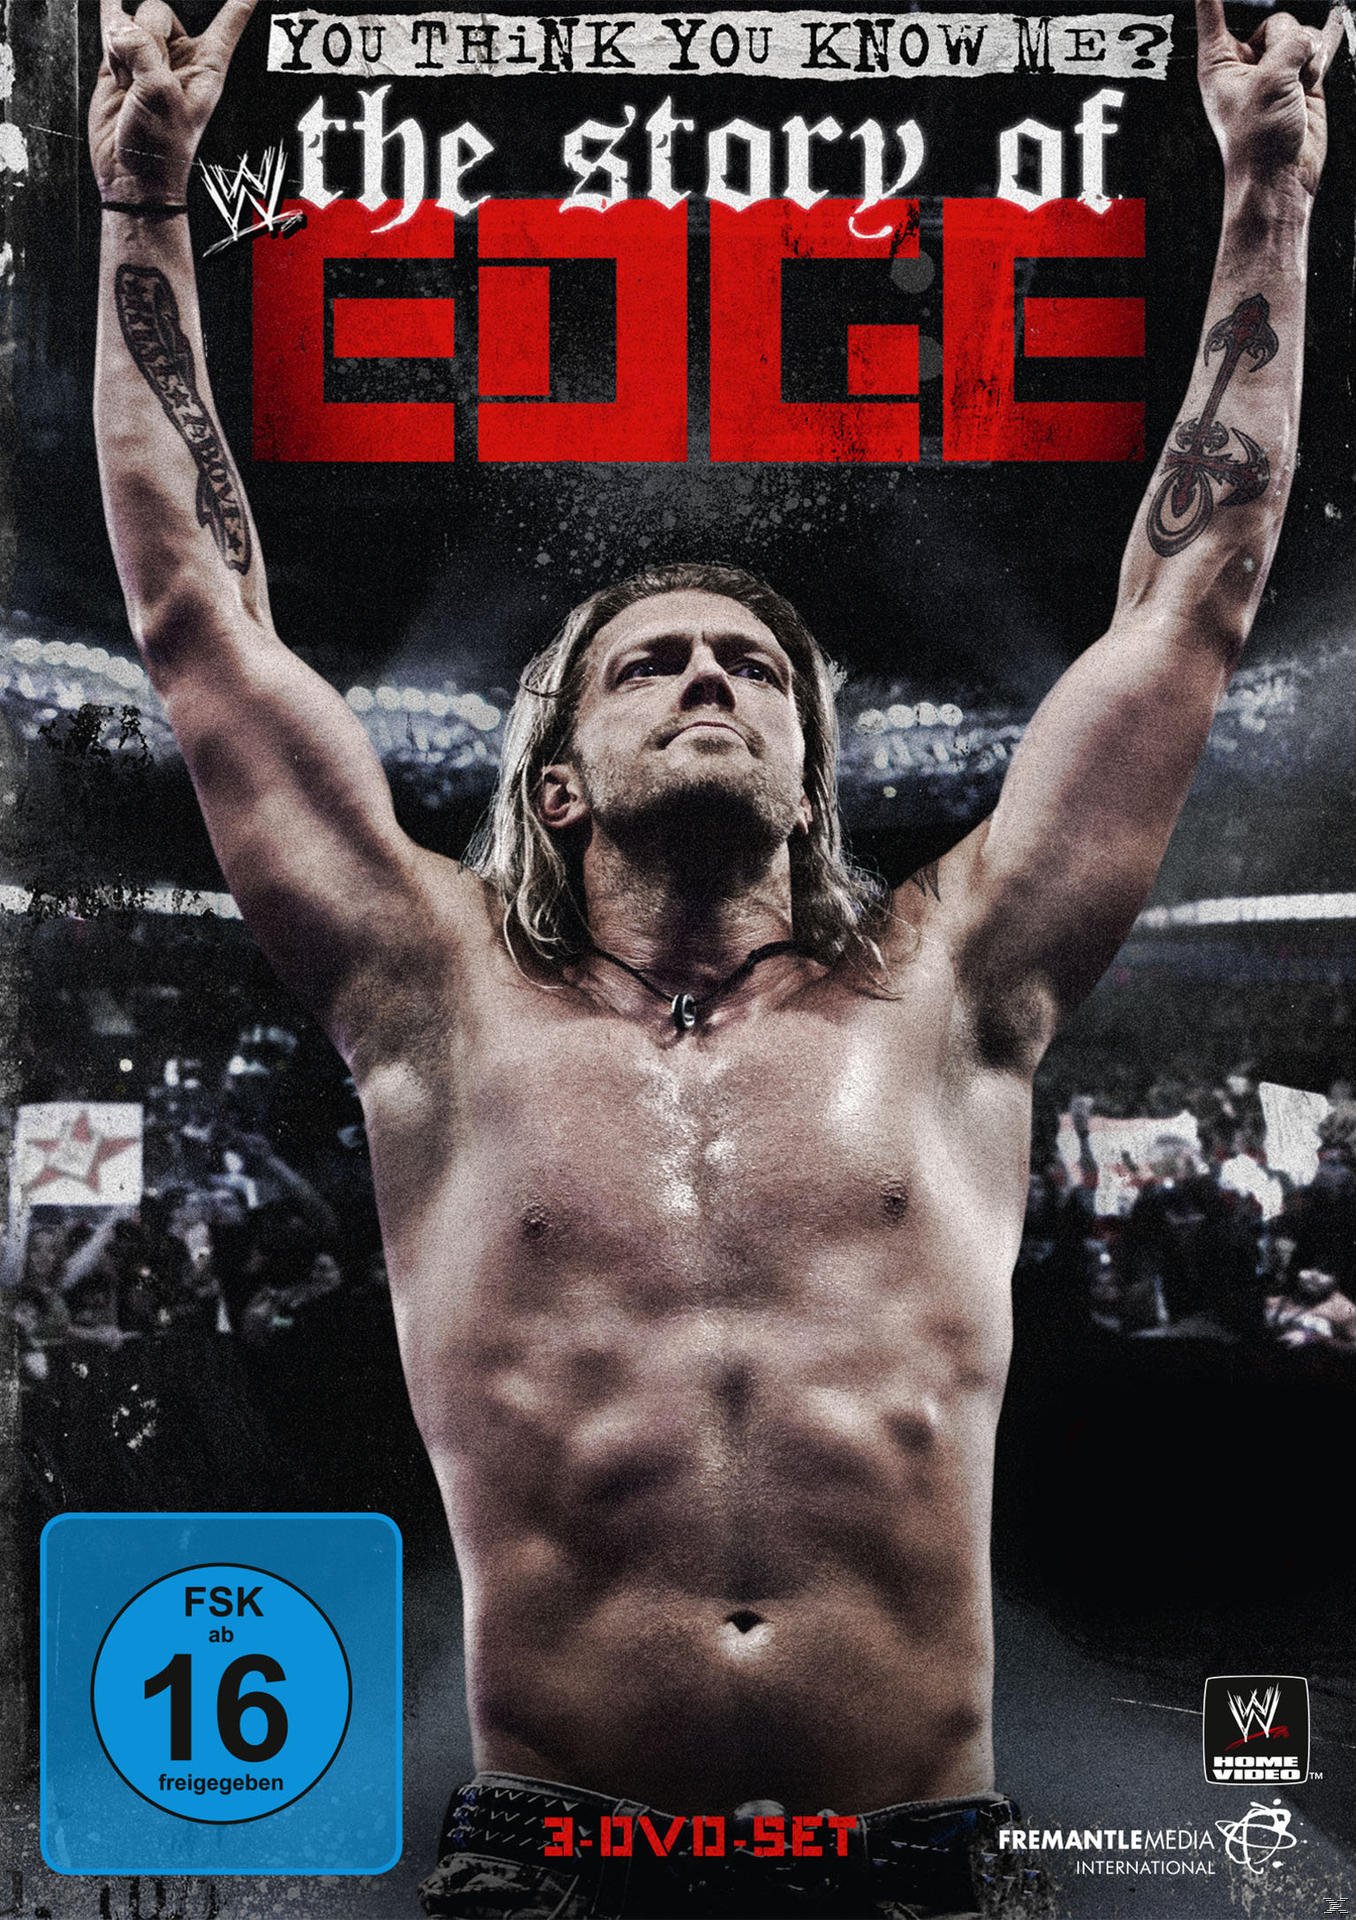 Know Edge You - WWE DVD You Think Me? The Story of